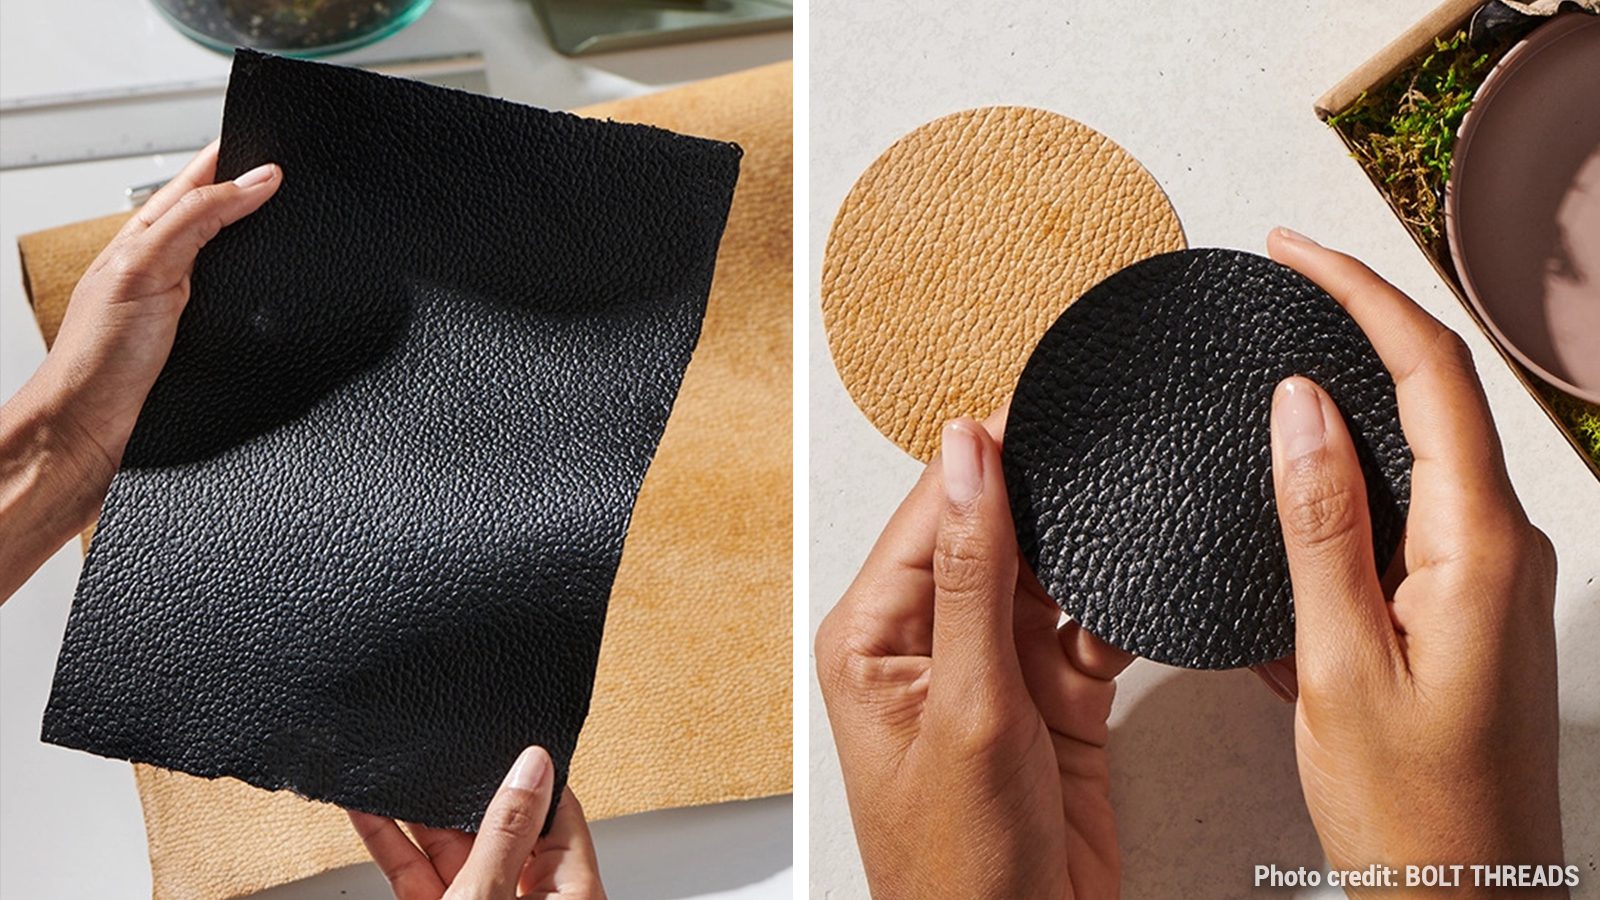 Fashion Turns To Vegan Mushroom Leather For New Styles